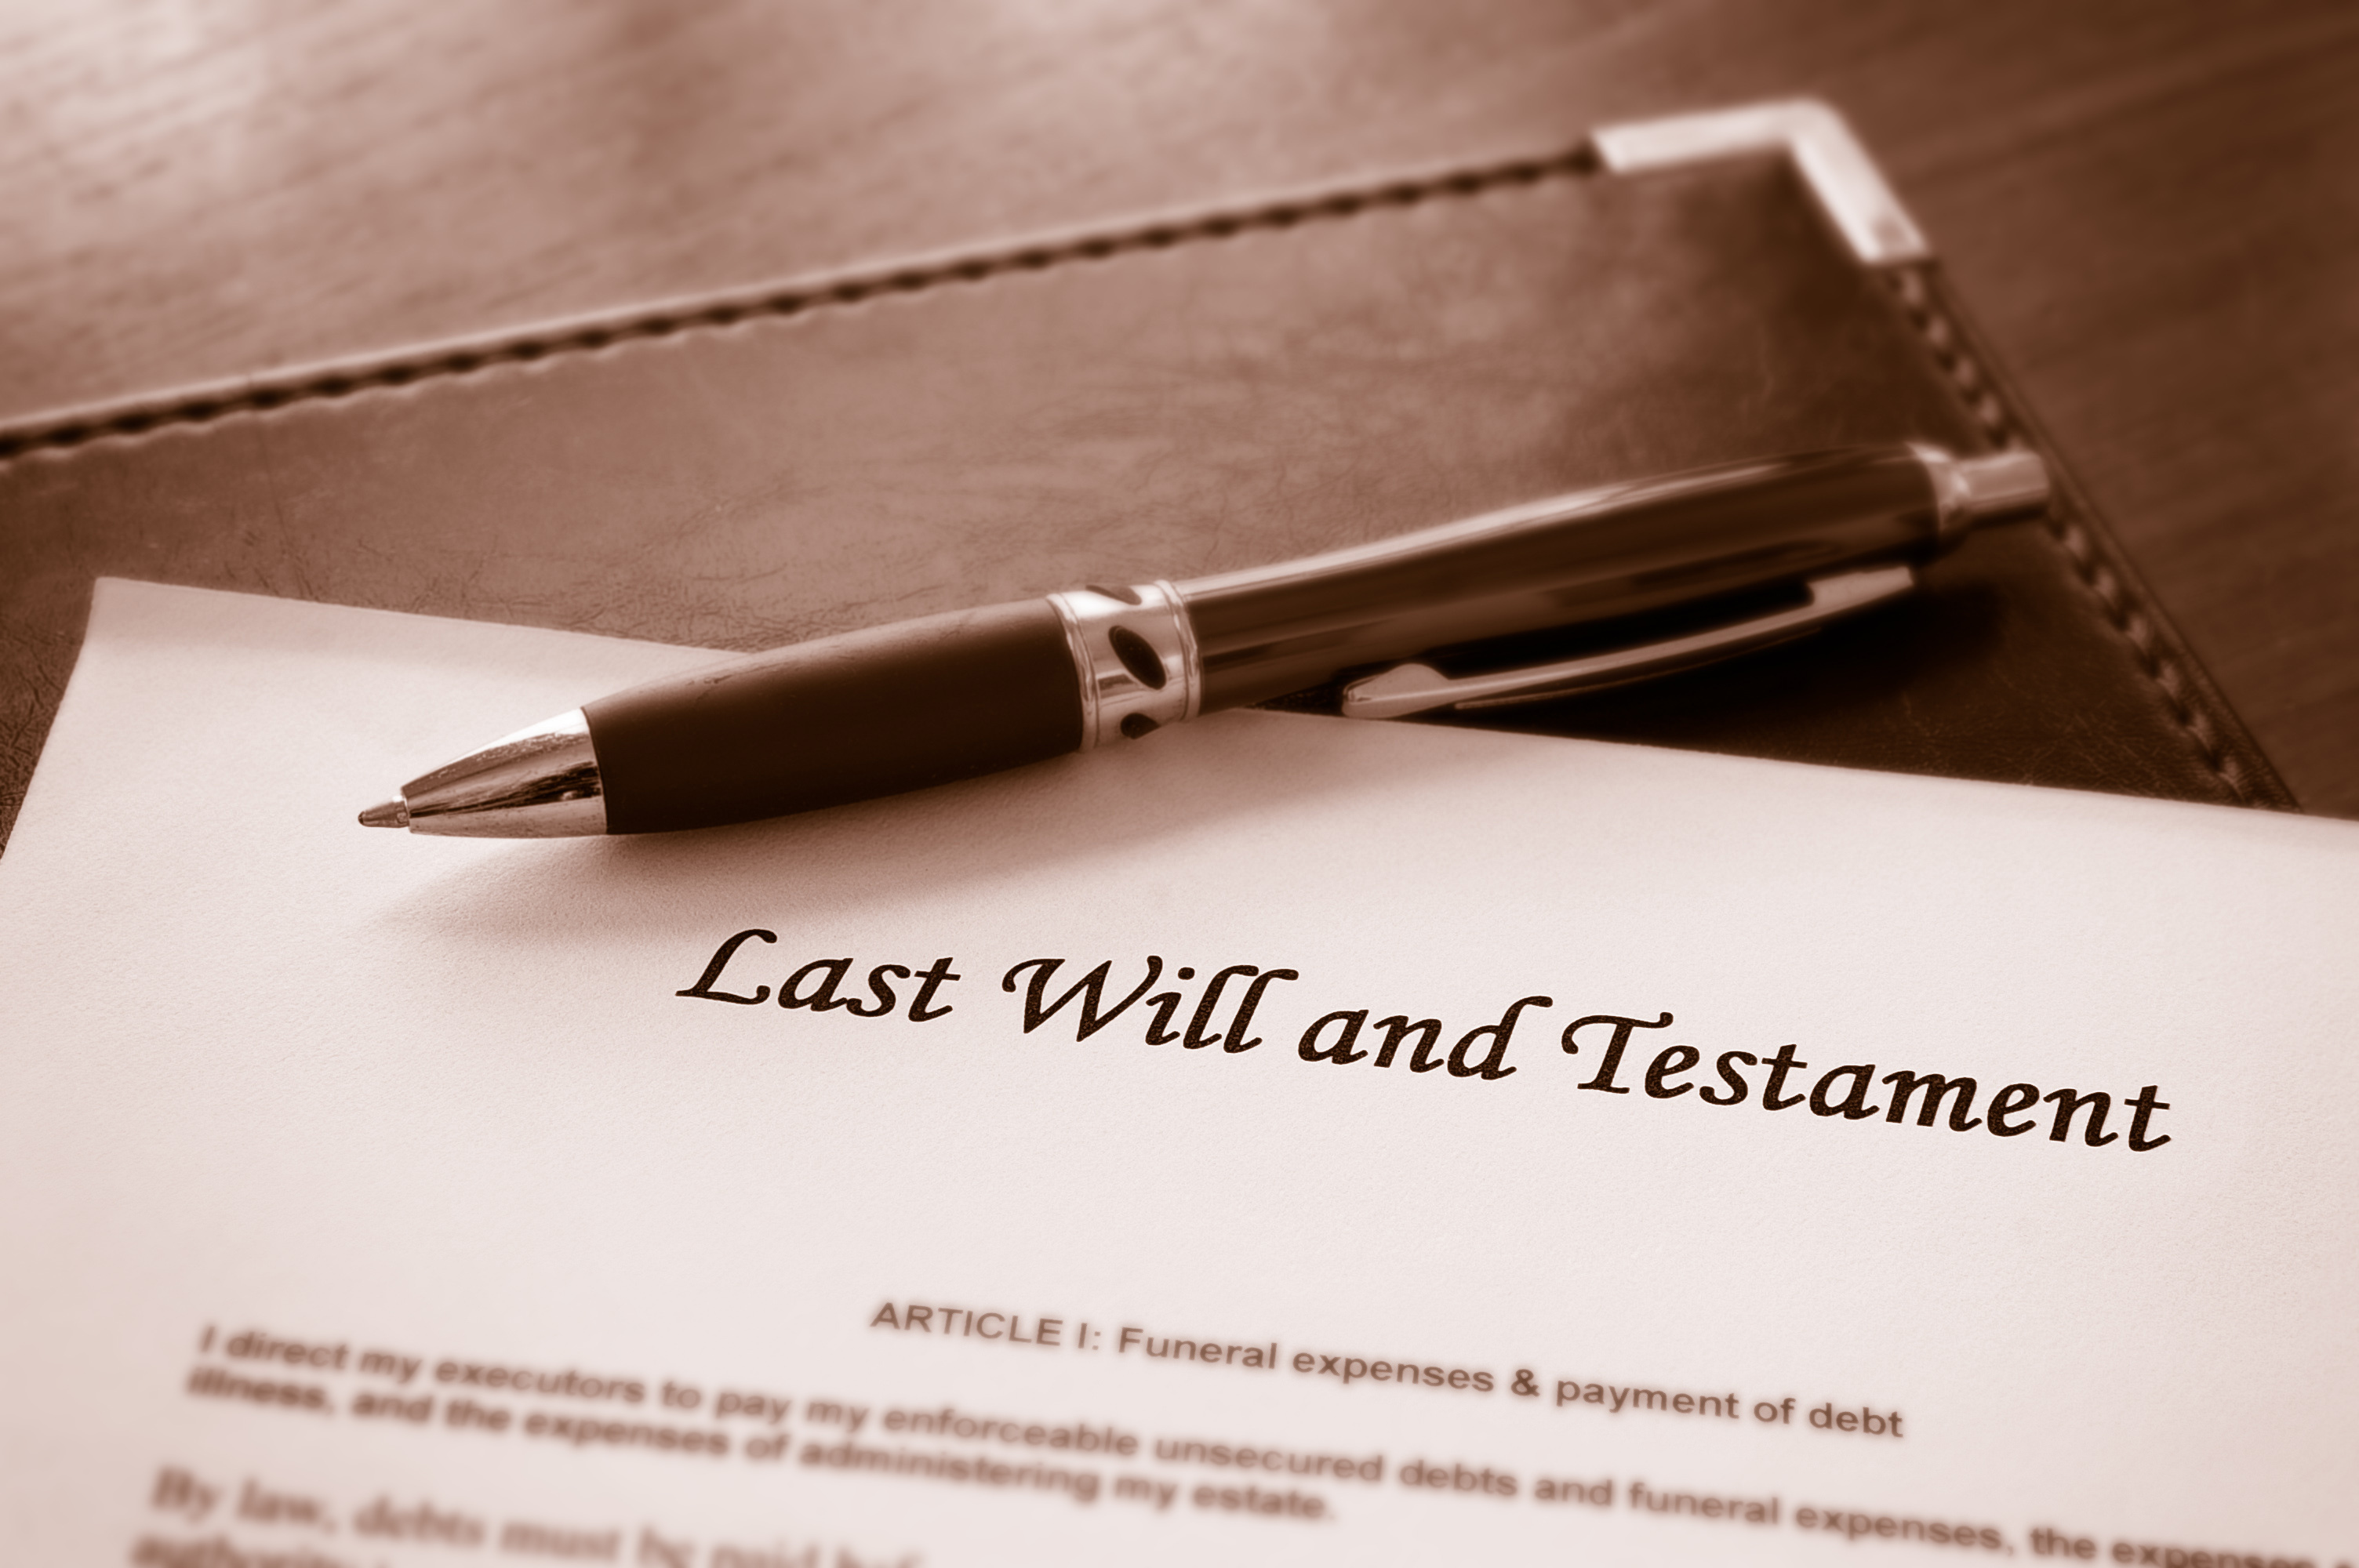 A document with the title "Last Will and Testament" | Source: Shutterstock